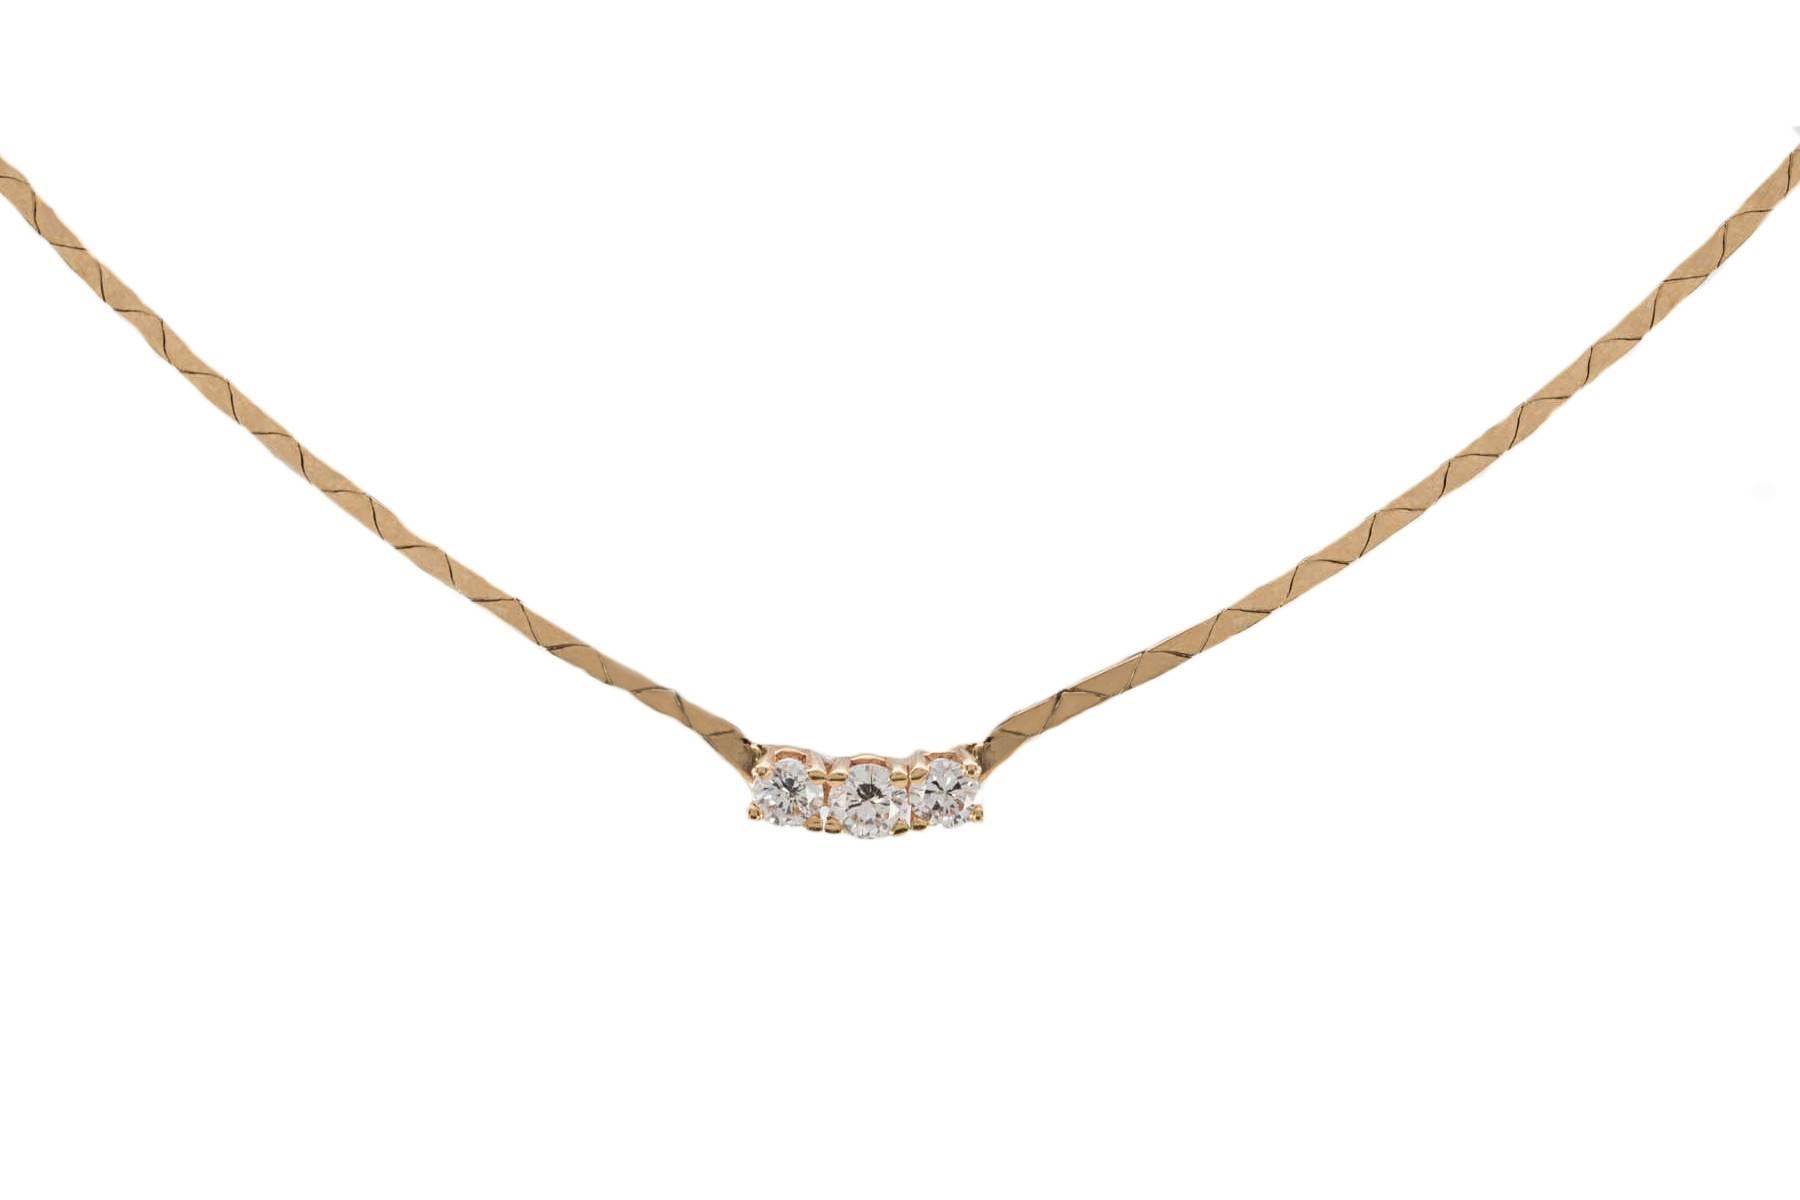 18K gold flat necklace with 3 round brilliant cut diamond weighing combined 0.37 carat. The necklace is approximately 16.5